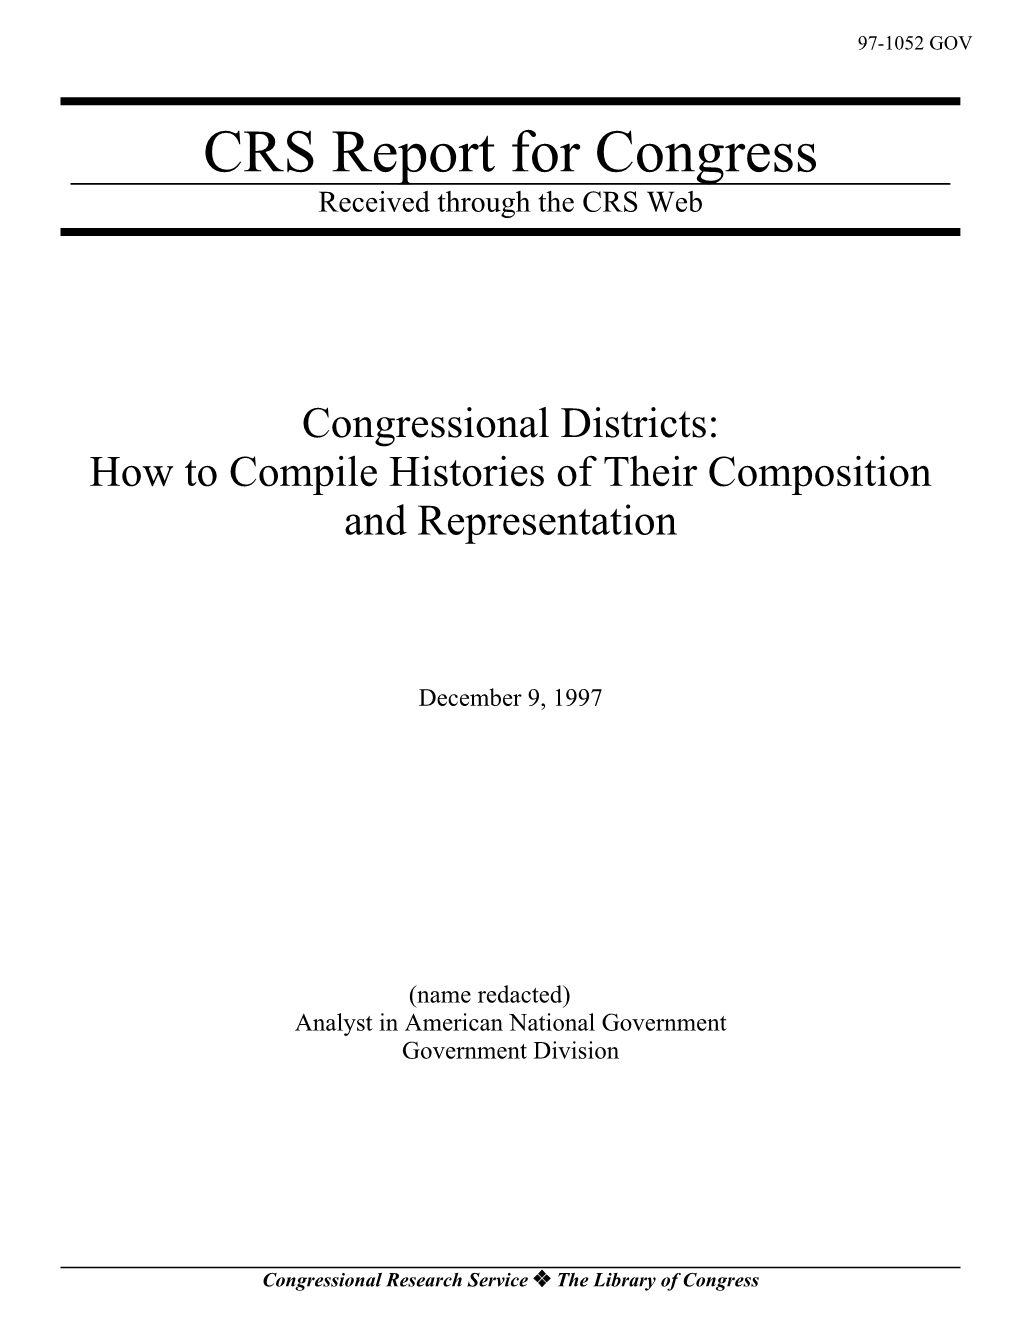 Congressional Districts: How to Compile Histories of Their Composition and Representation